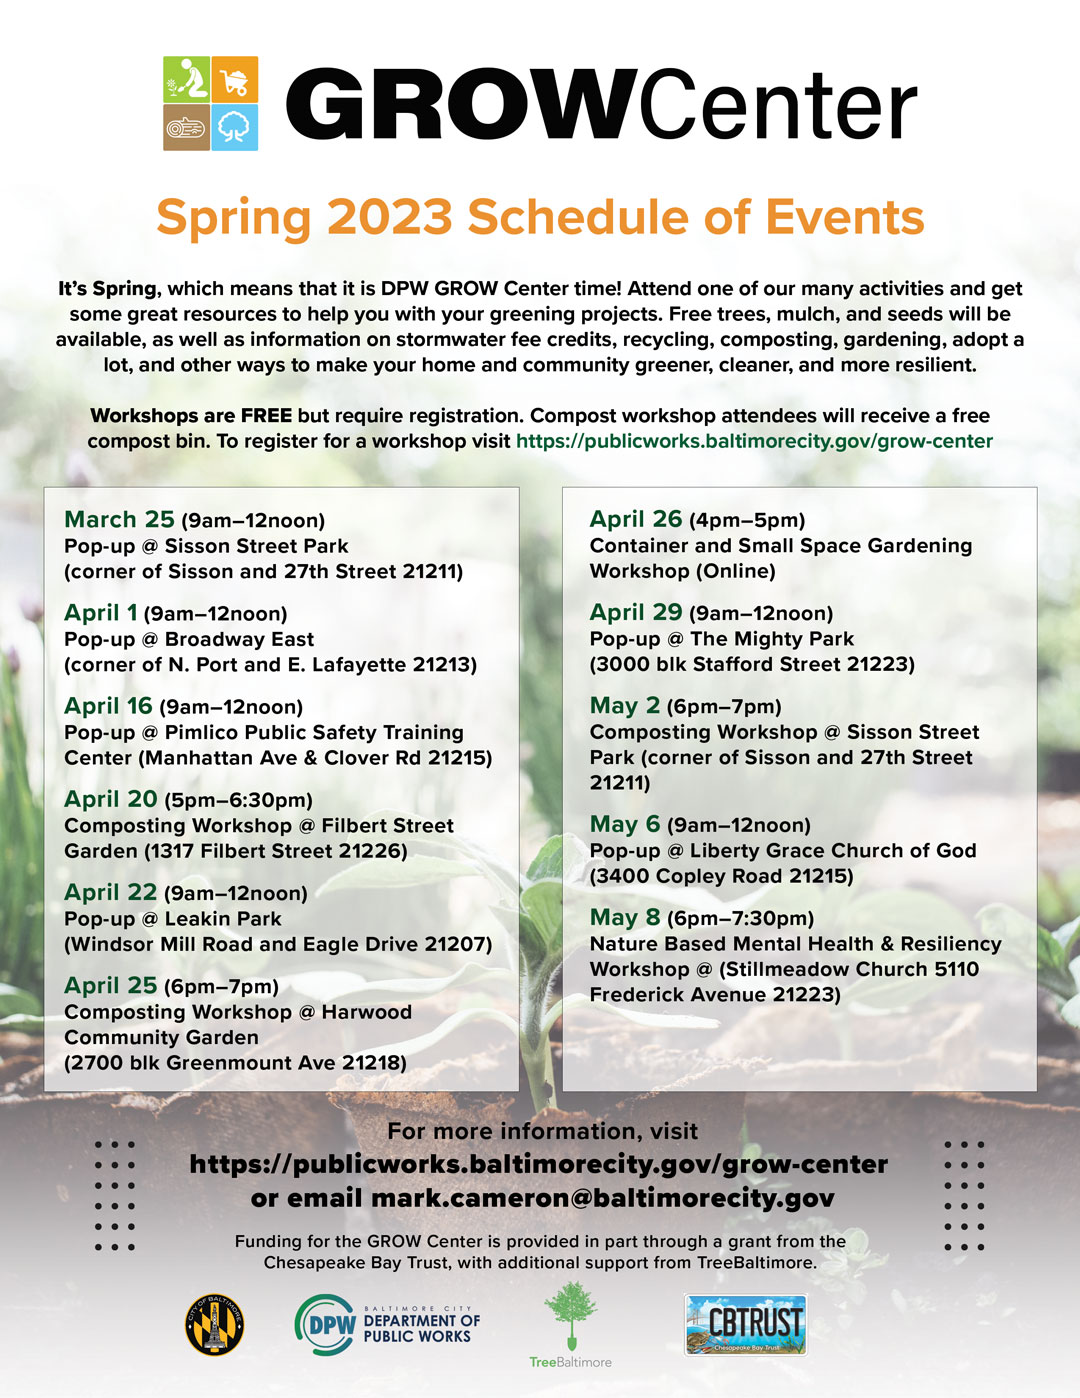 Grow Center Spring Schedule of Events 2023